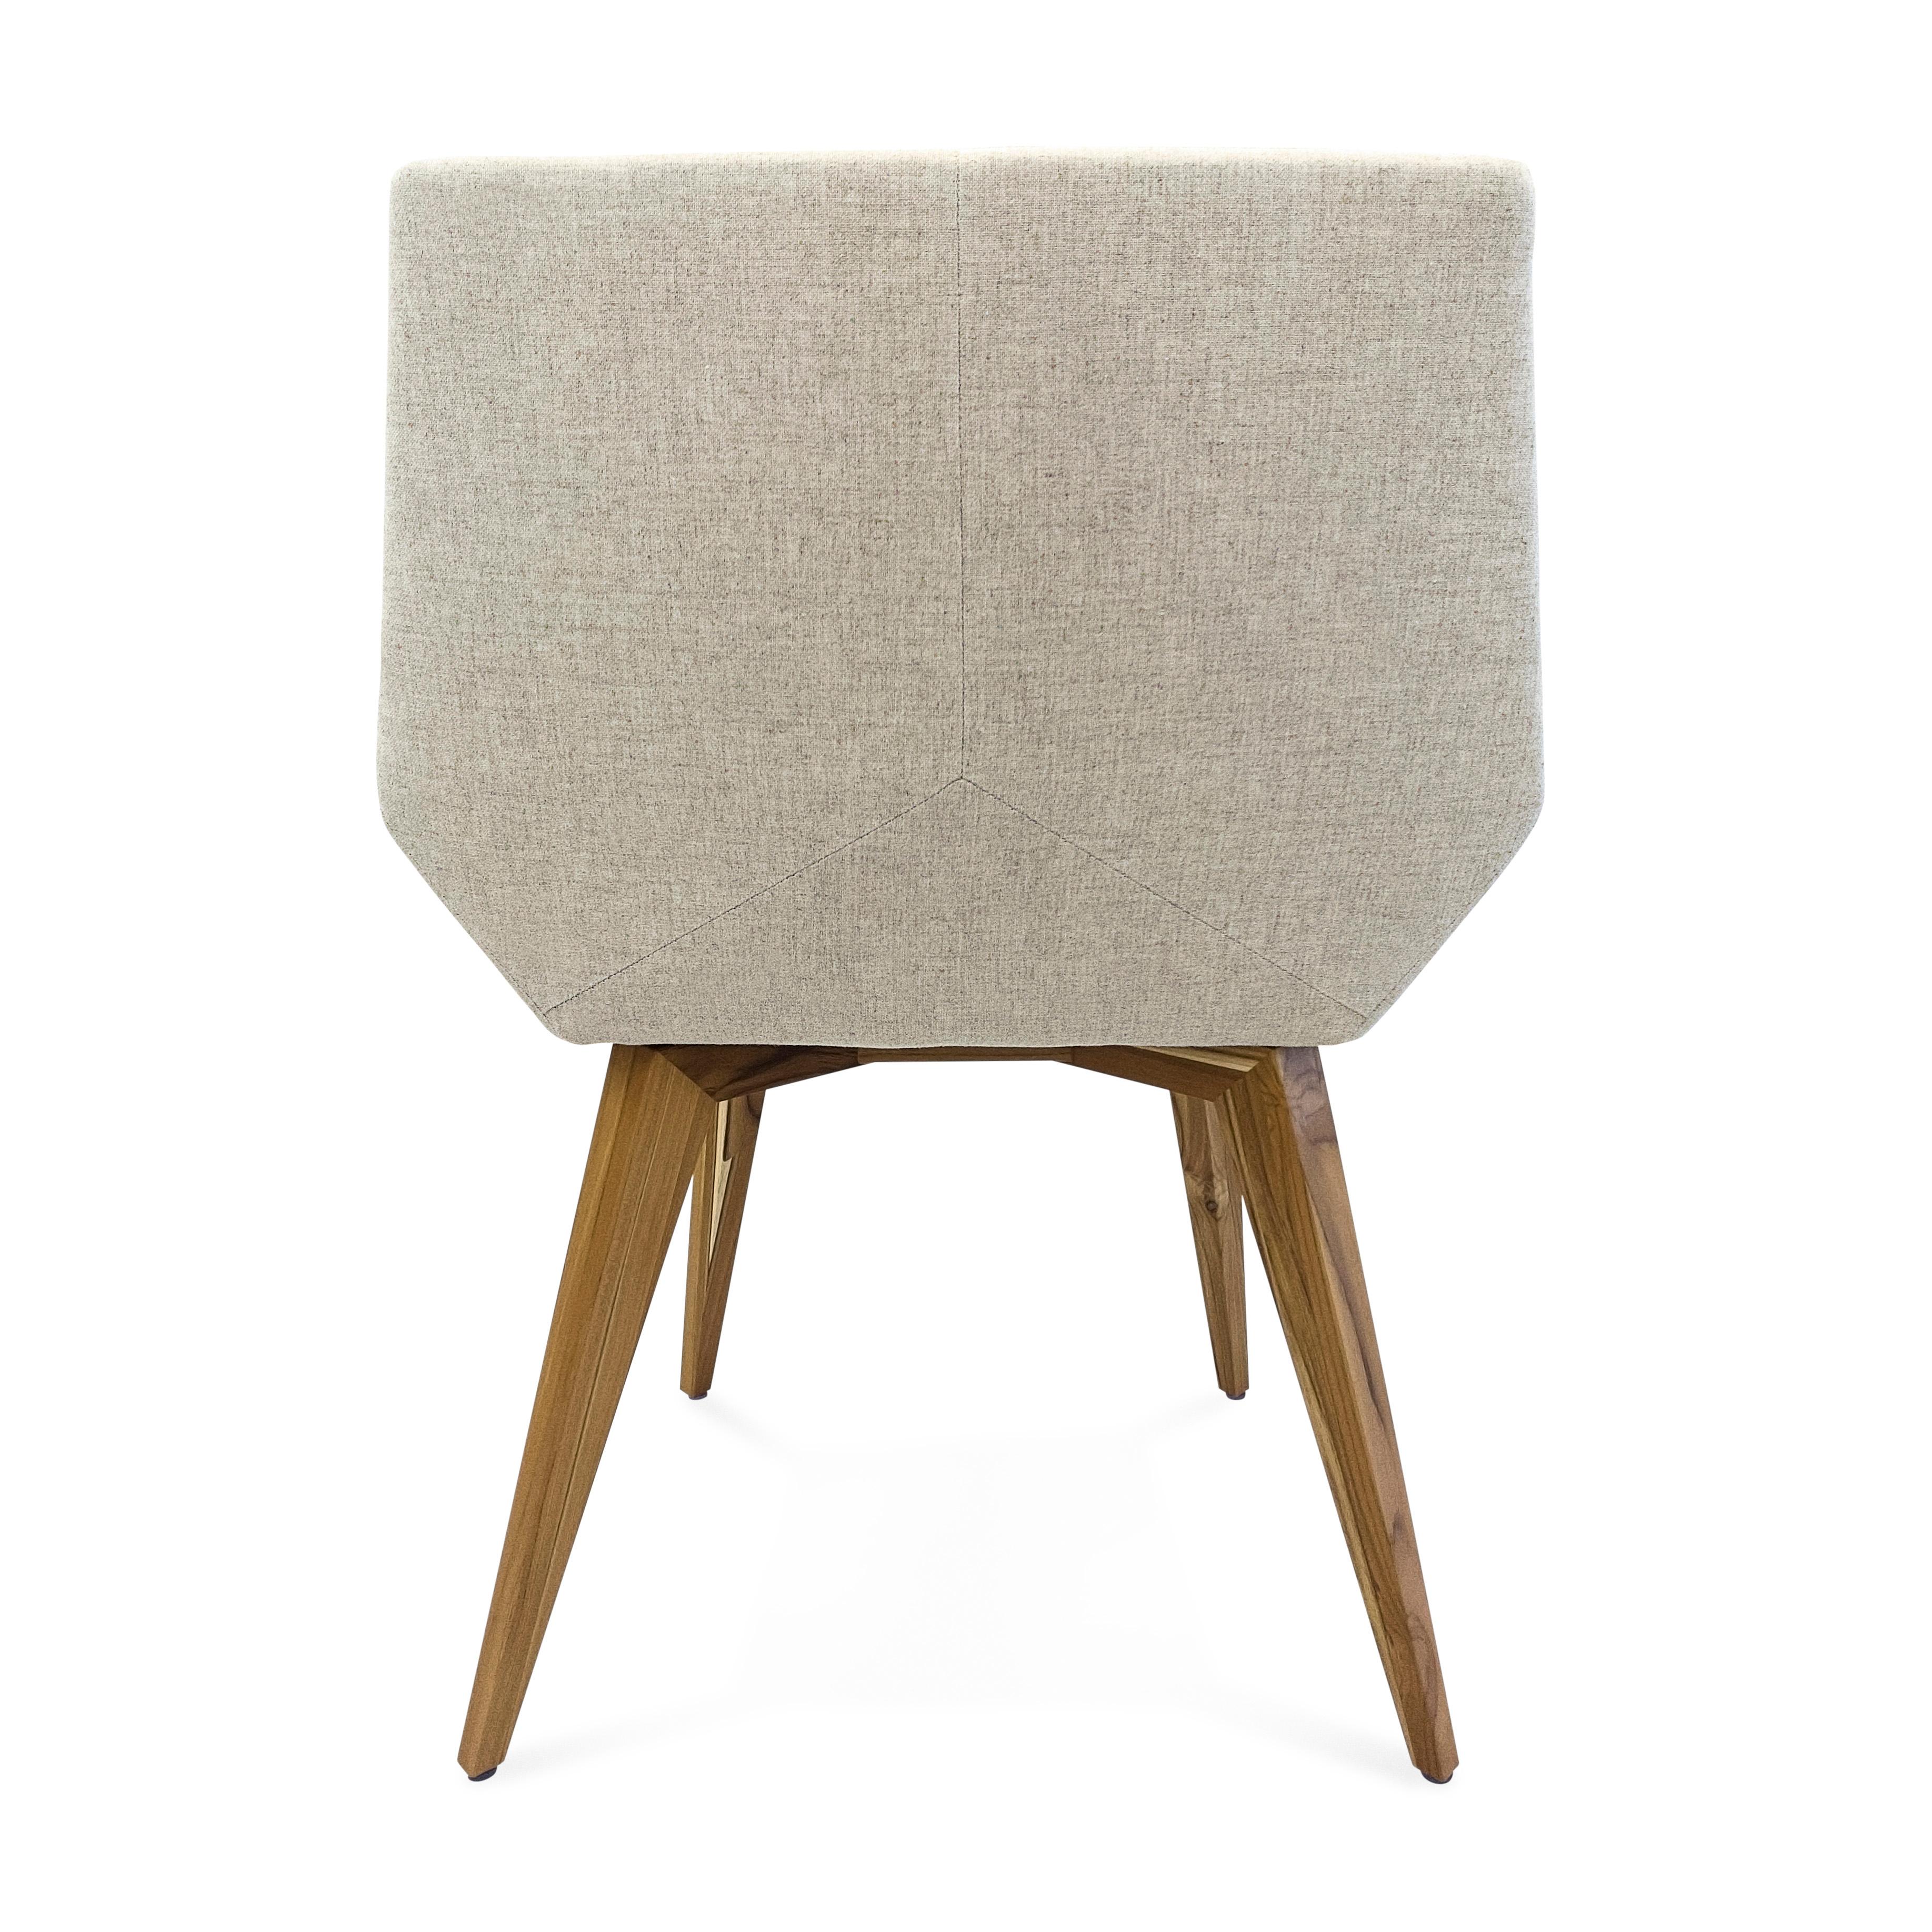 Contemporary Geometric Cubi Dining Chair with Teak Wood Finish Base and Ivory Fabric  For Sale